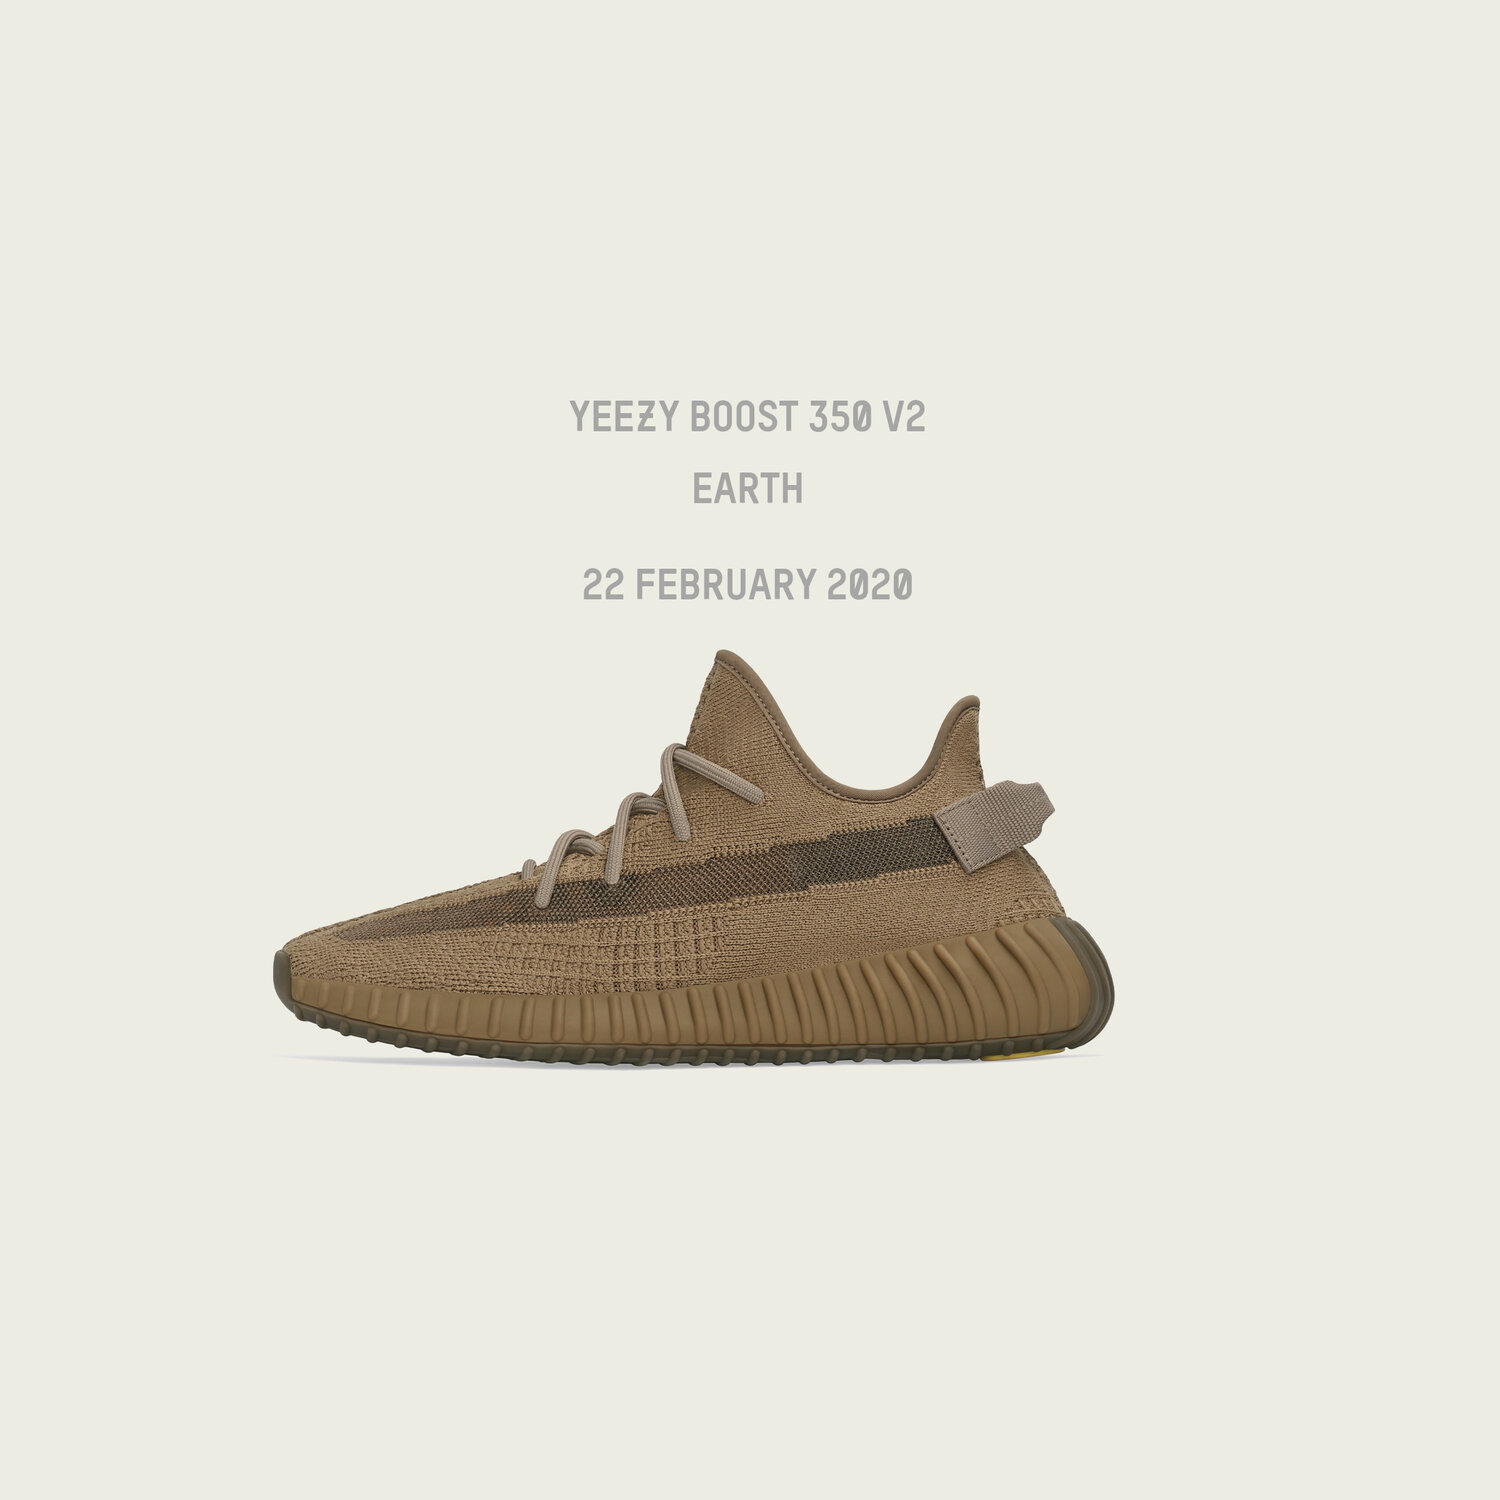 Namens Hechting Monument ADIDAS YEEZY BOOST 350 V2 “EARTH” [FX9033] — PRIVATE